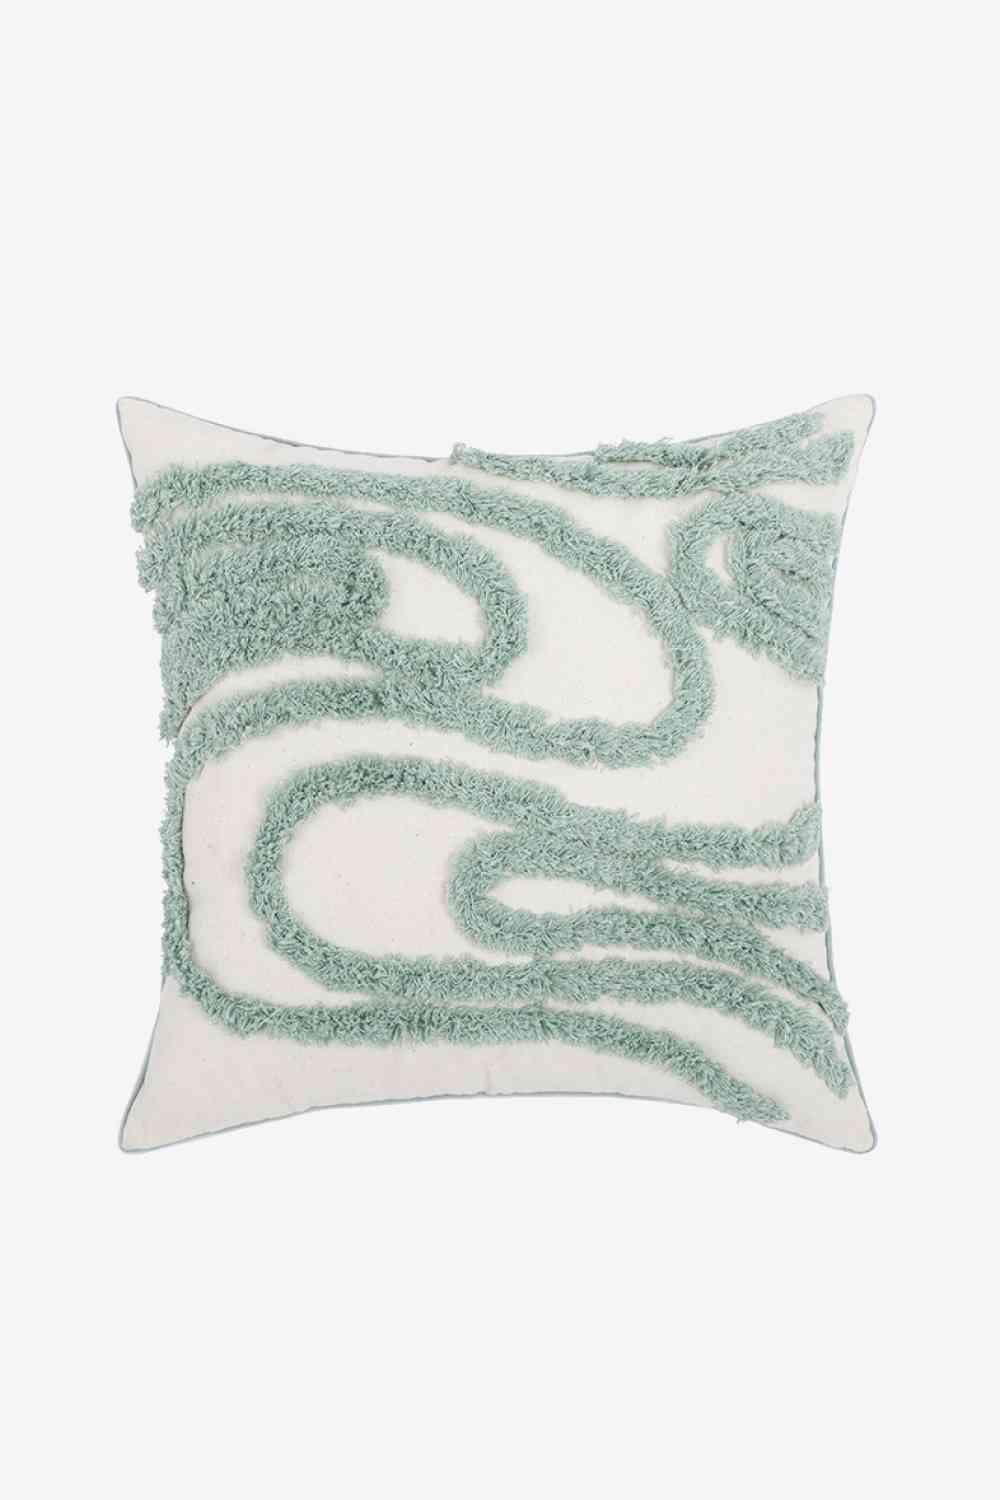 3-Pack Decorative Throw Pillow Cases - BloomBliss.com